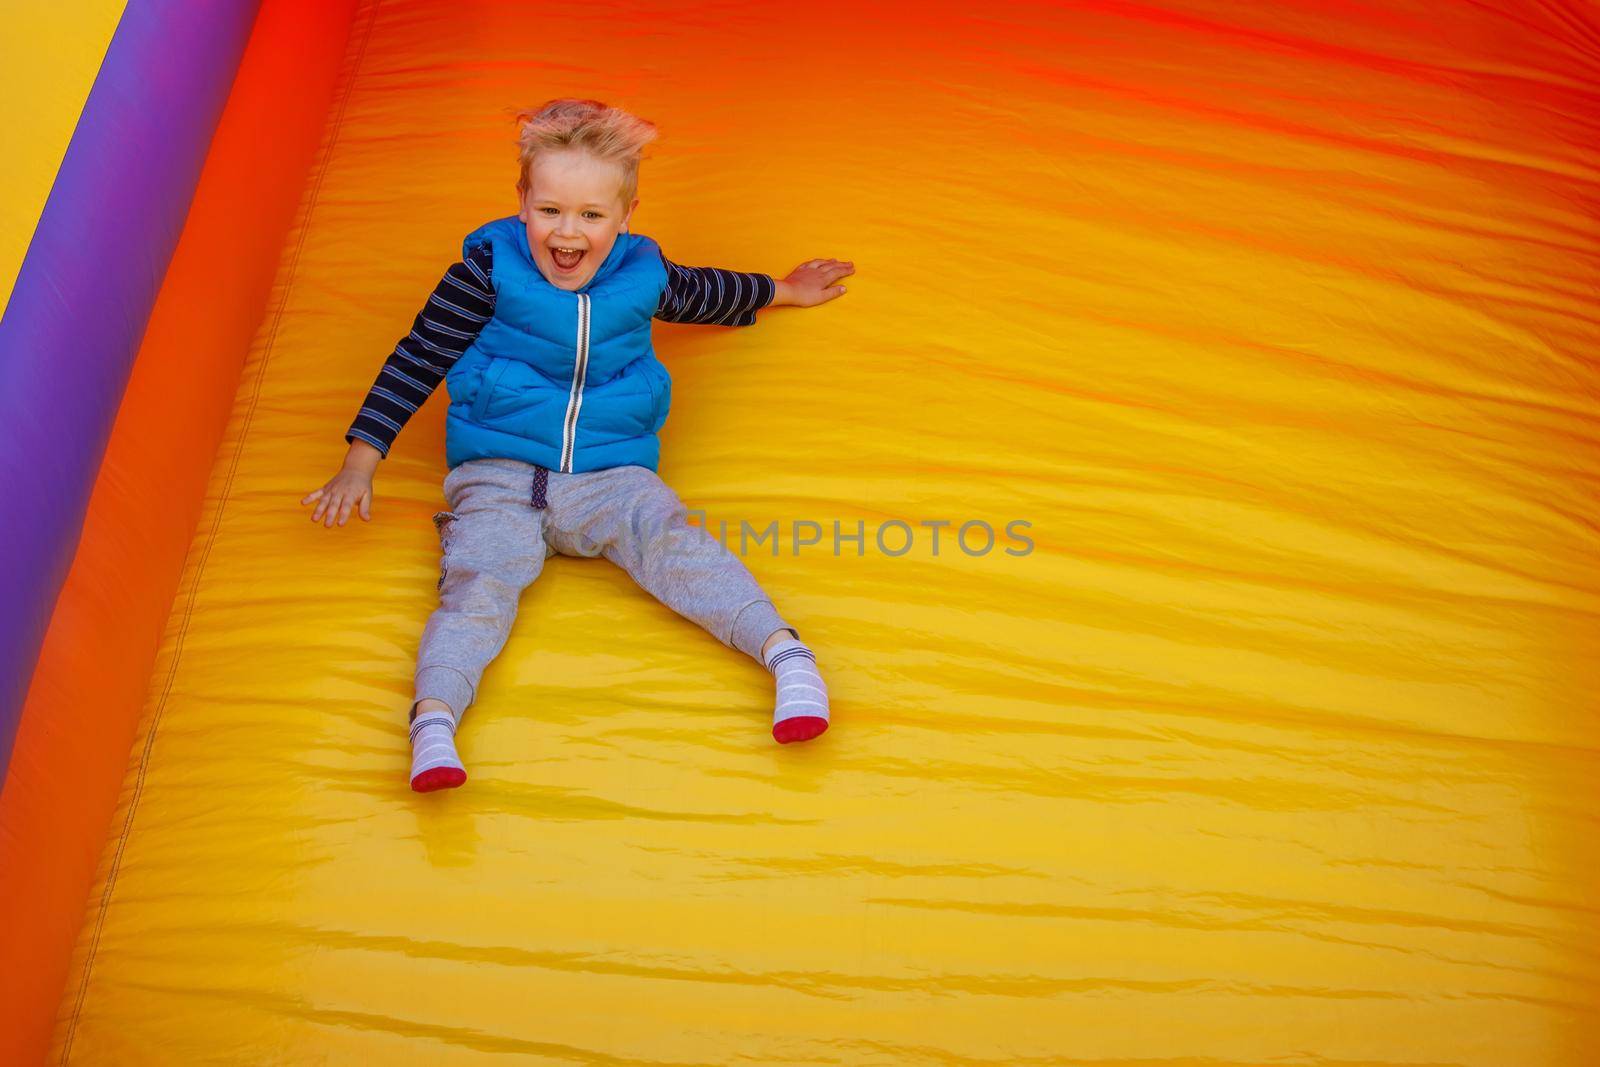 Boy jumping down the slide on a yellow-orange inflatable bouncy castle. There is free space for text in the image.